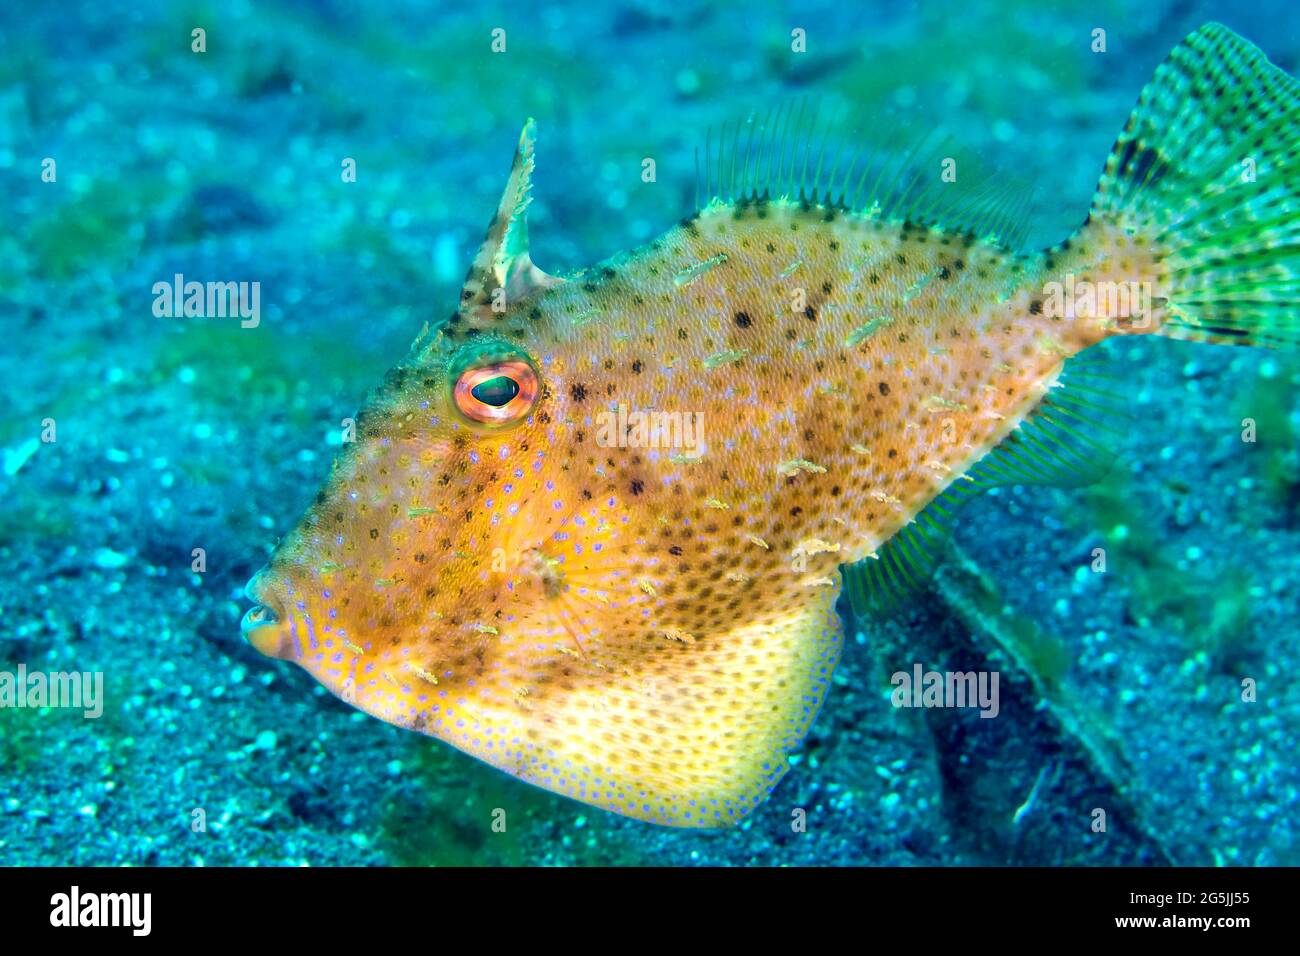 Filefsh, Fan-belly Leatherjacket, Monacanthus chinensis, Lembeh, North Sulawesi, Indonesia, Asia Stock Photo